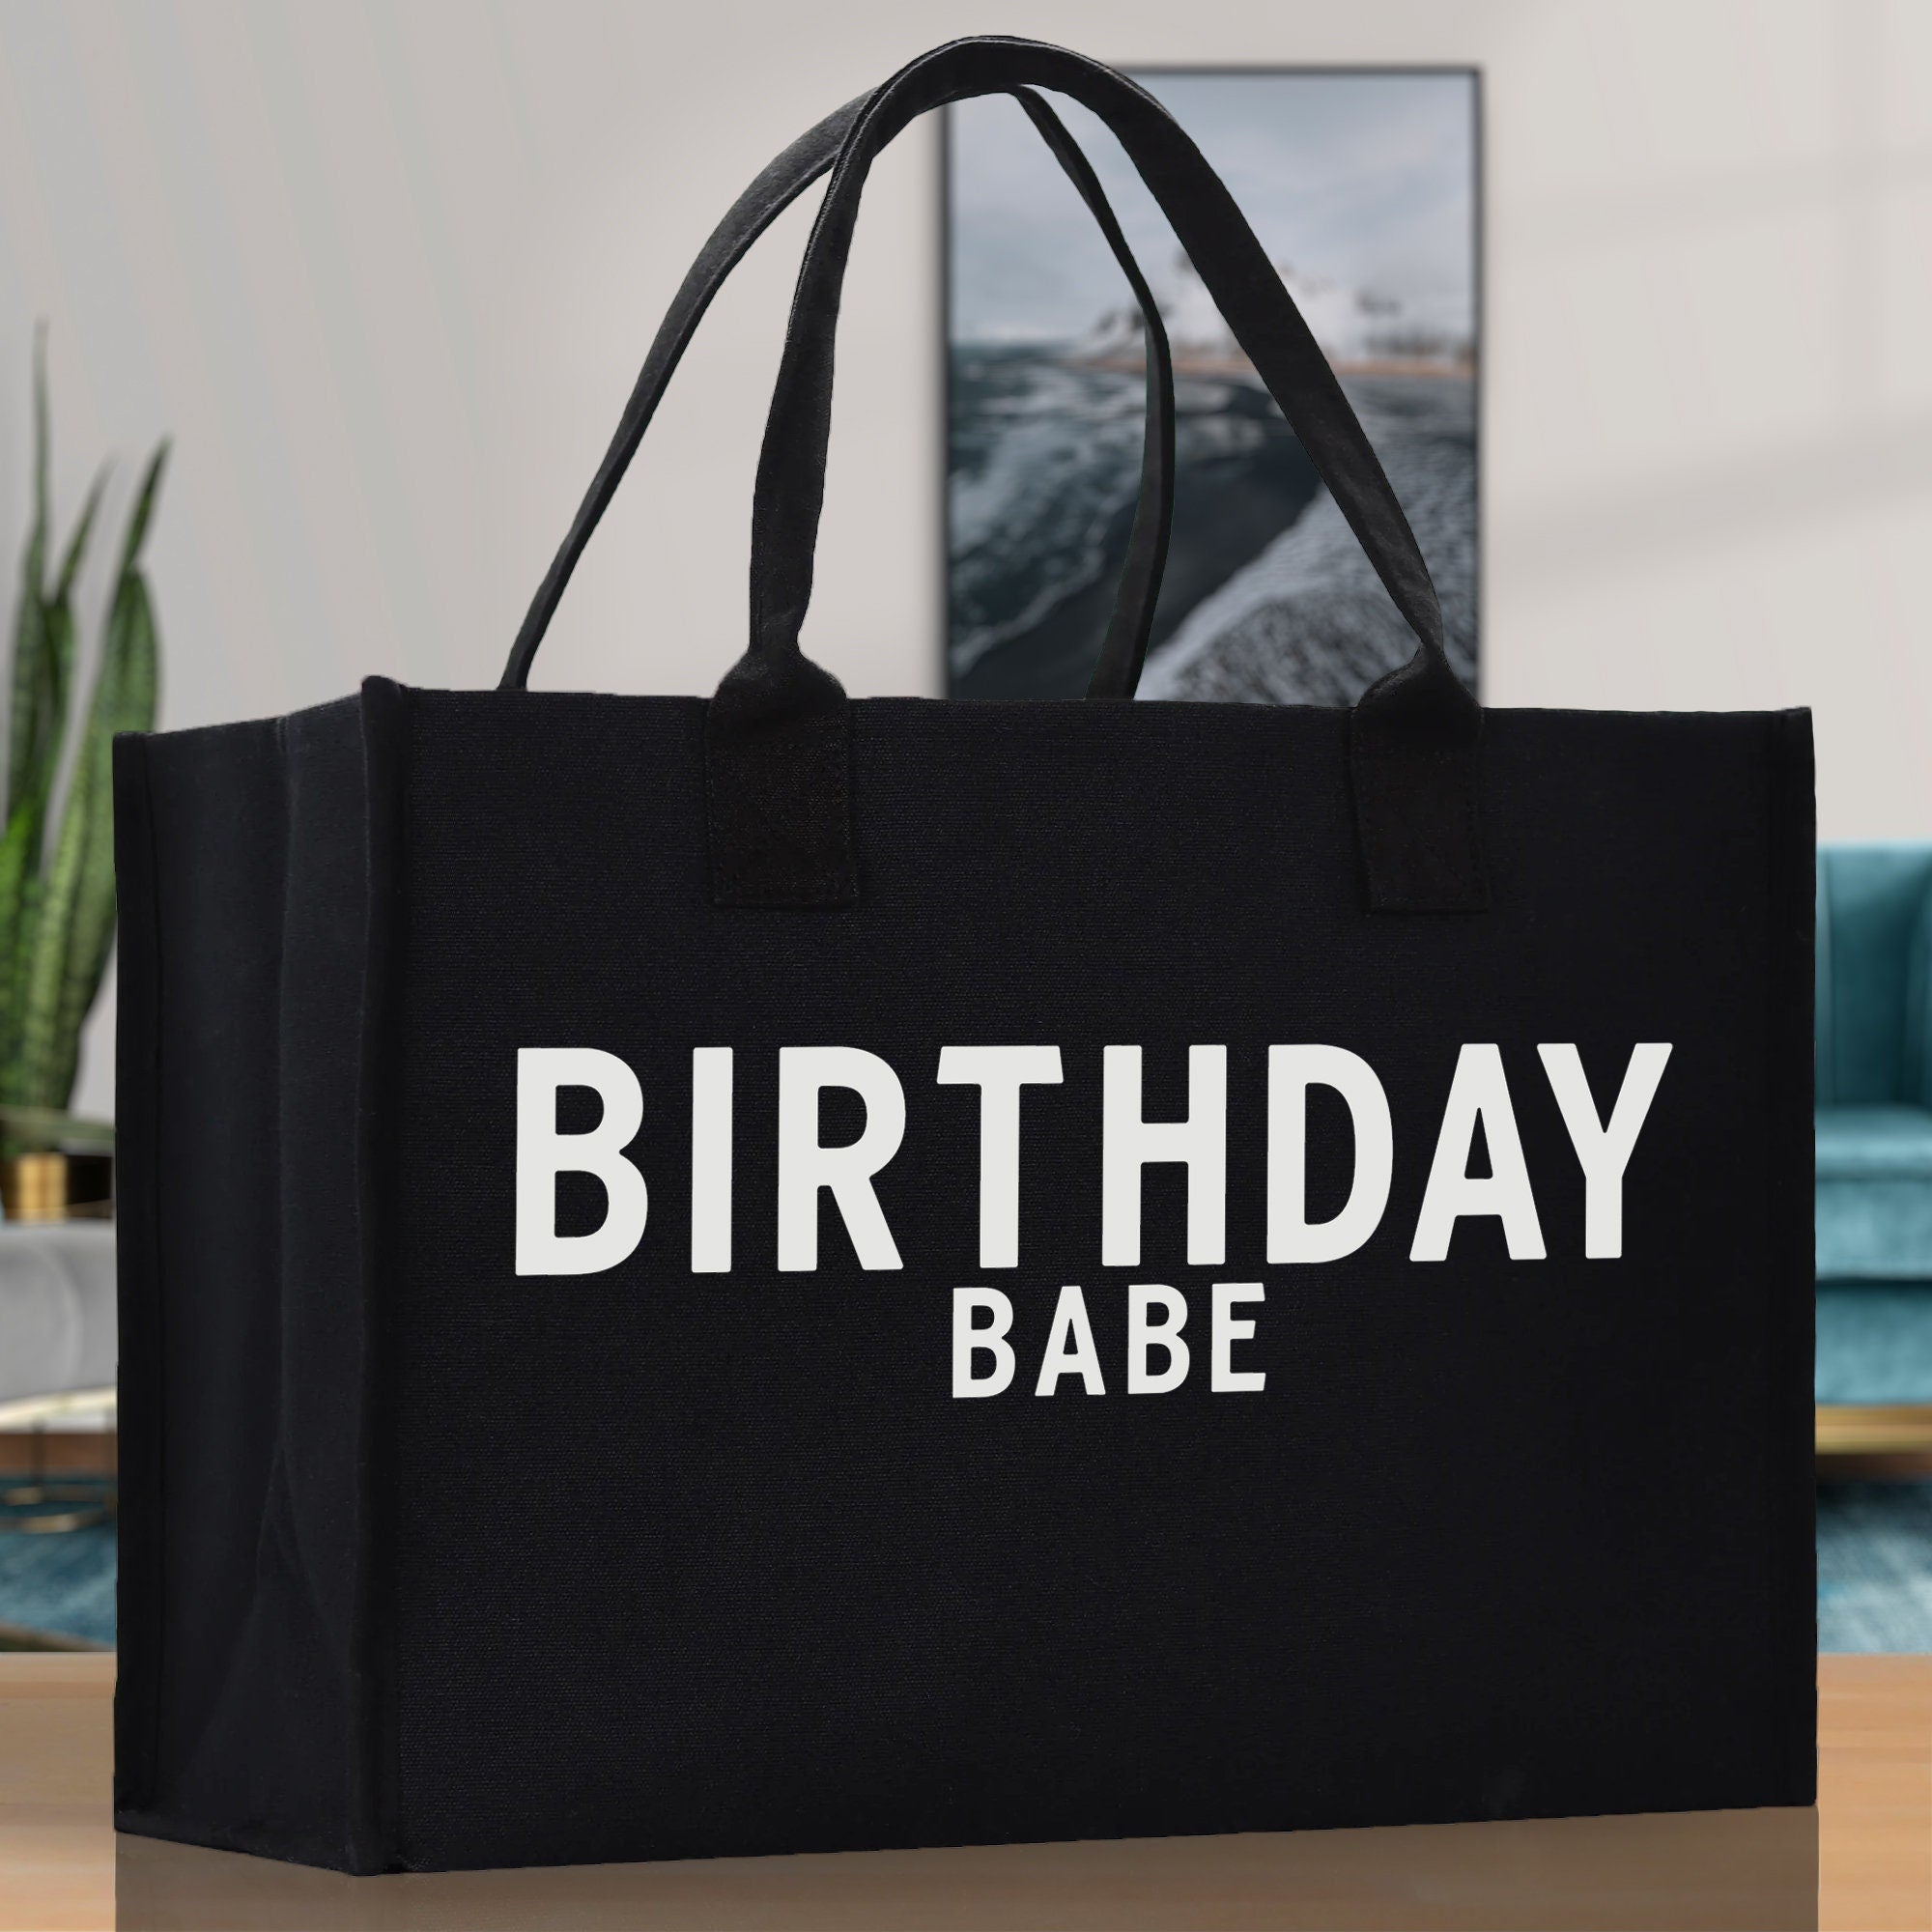 Birthday Babe Cotton Canvas Chic Beach Tote Bag Multipurpose Tote Weekender Tote Gift for Her Outdoor Tote Vacation Tote Large Beach Bag